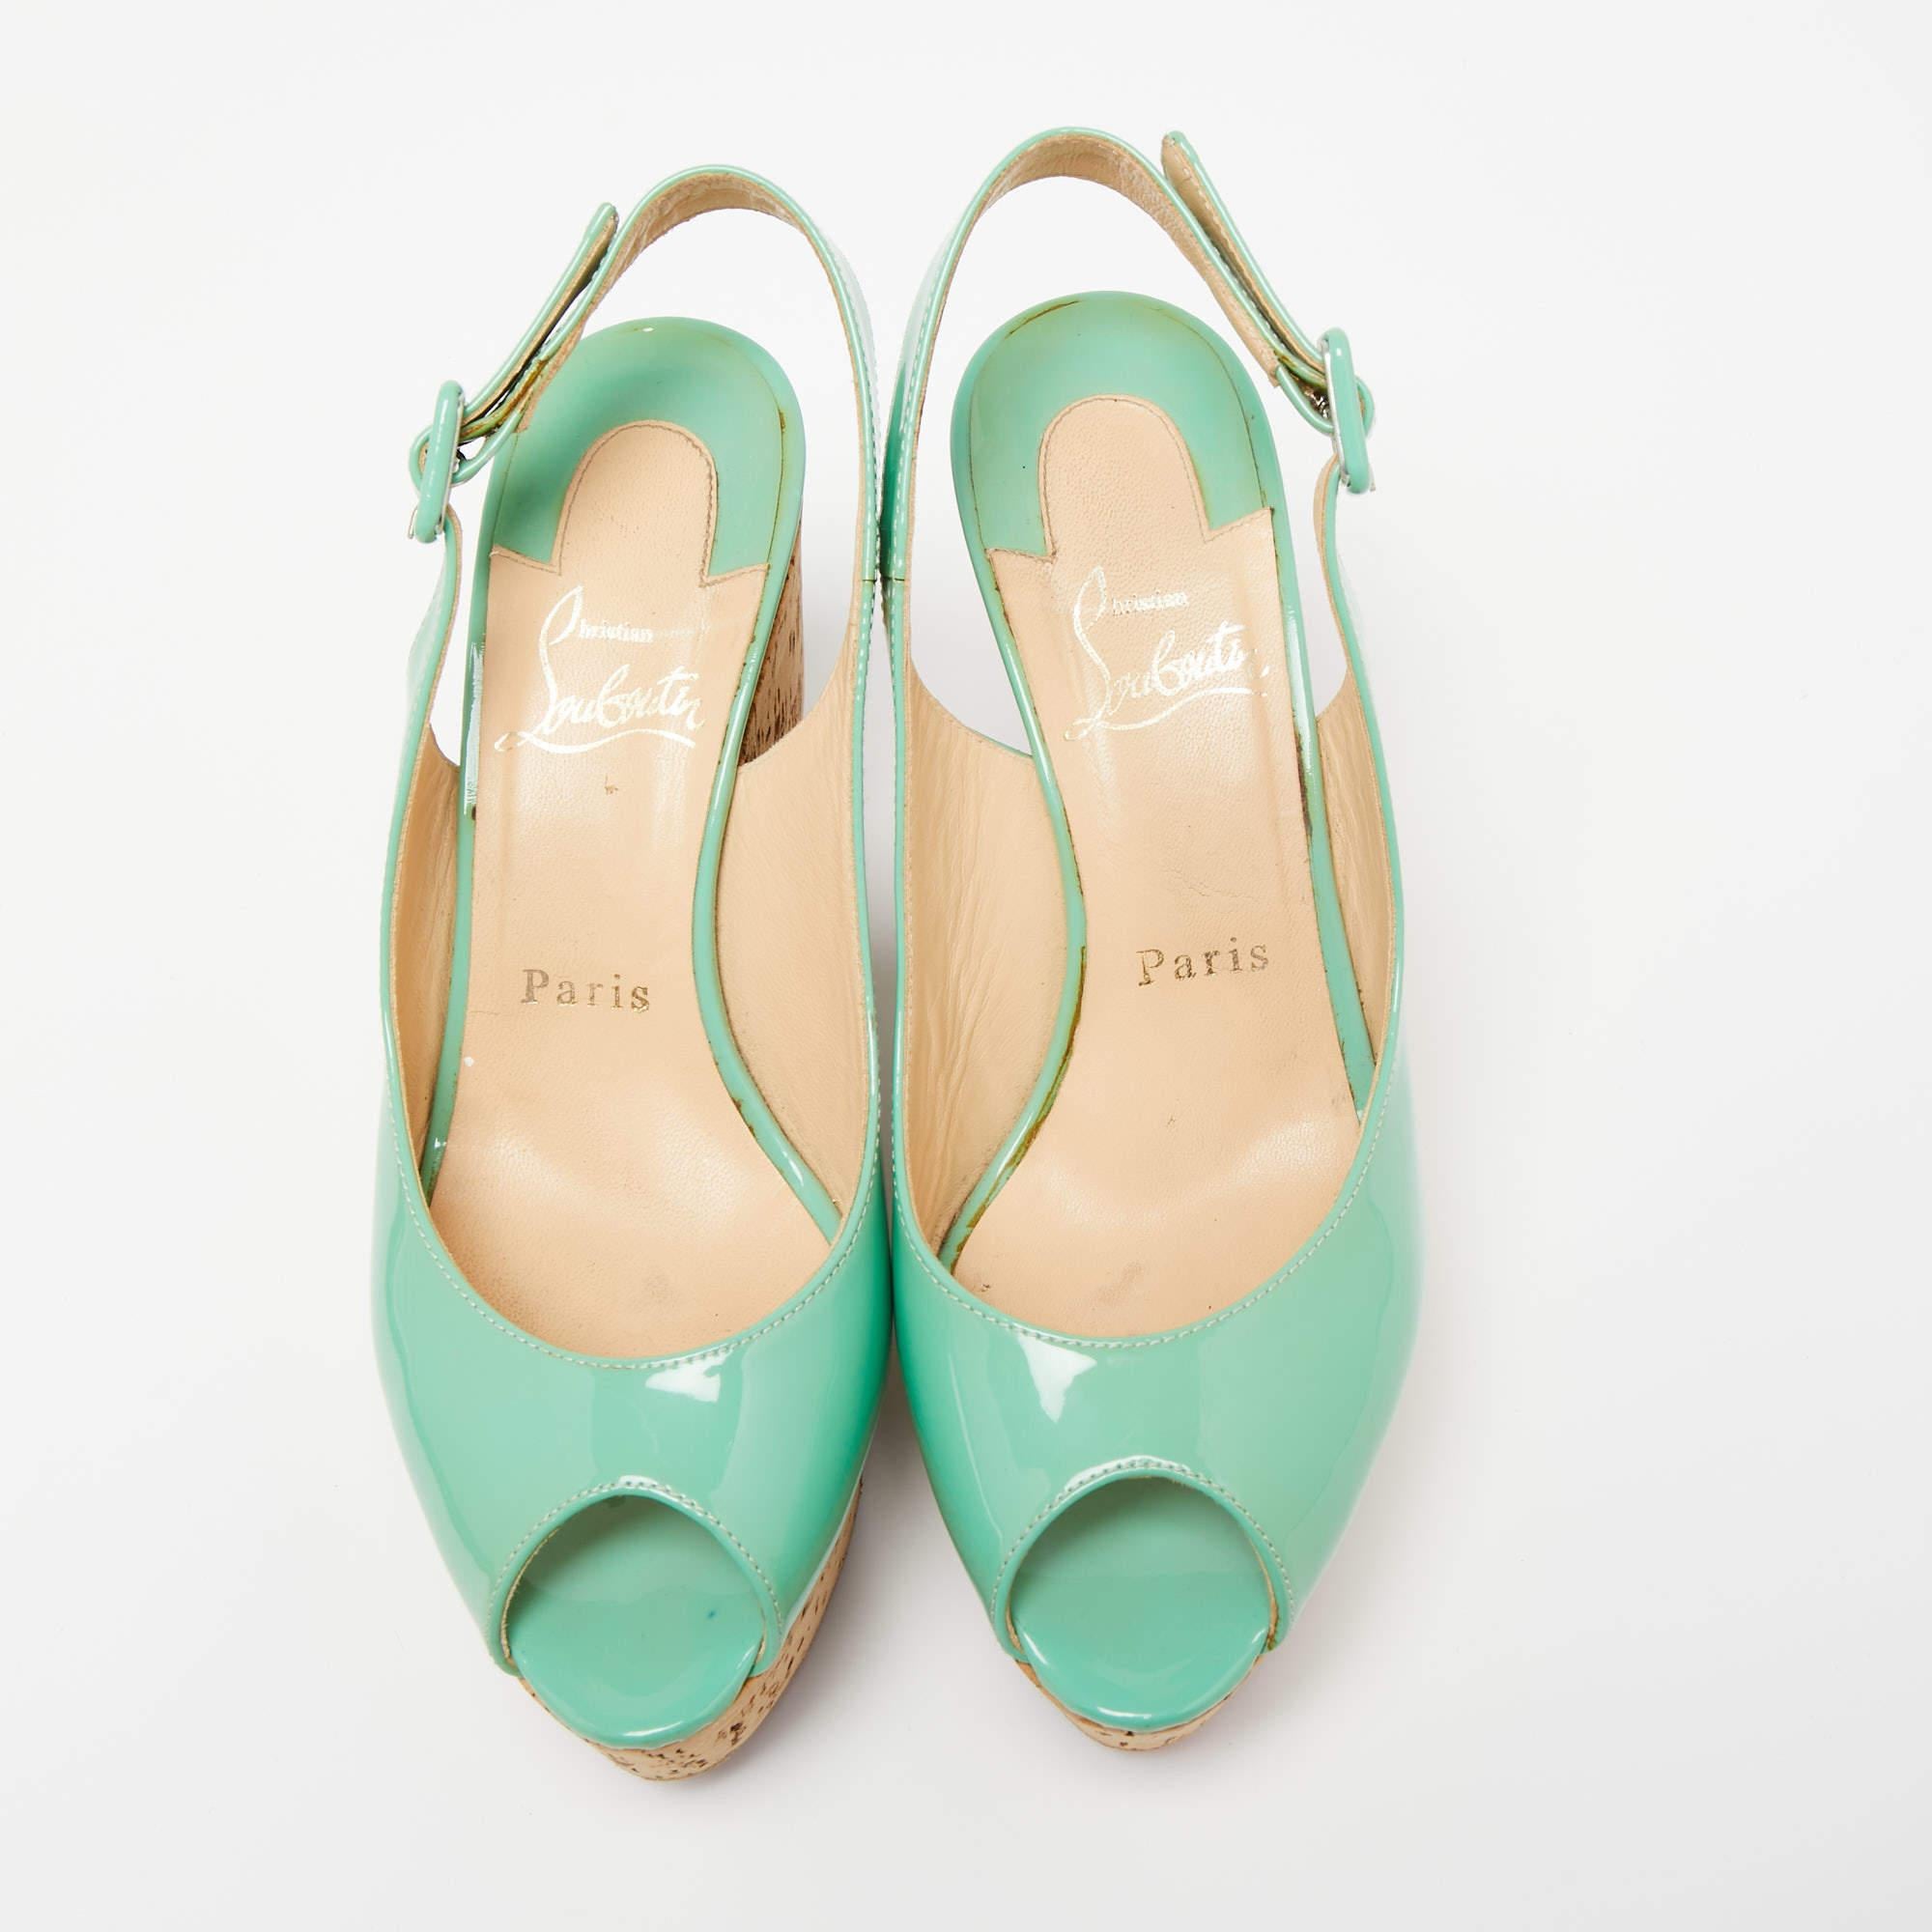 These sandals from Christian Louboutin will certainly make you look classy and polished! They are created using green patent leather and showcase wedge heels, a buckled slingback, and peep-toes. Look gorgeous as you wear these CL sandals!

